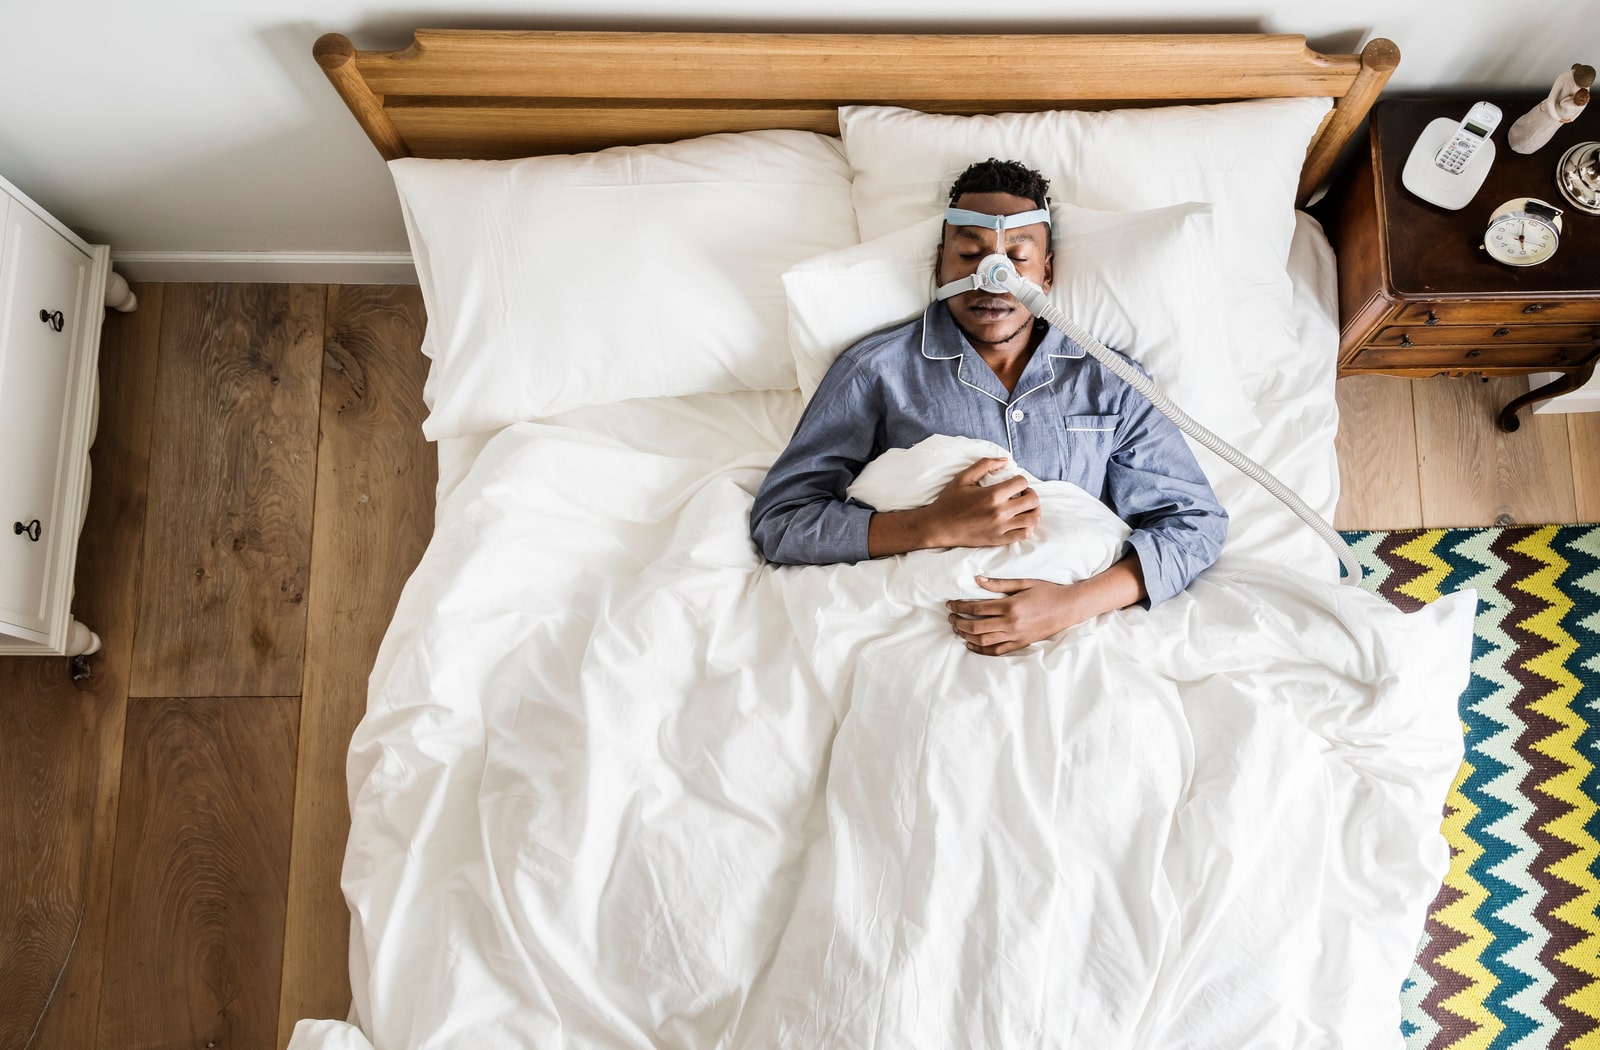 A man asleep in bed with a CPAP machine over his face to treat sleep apnea